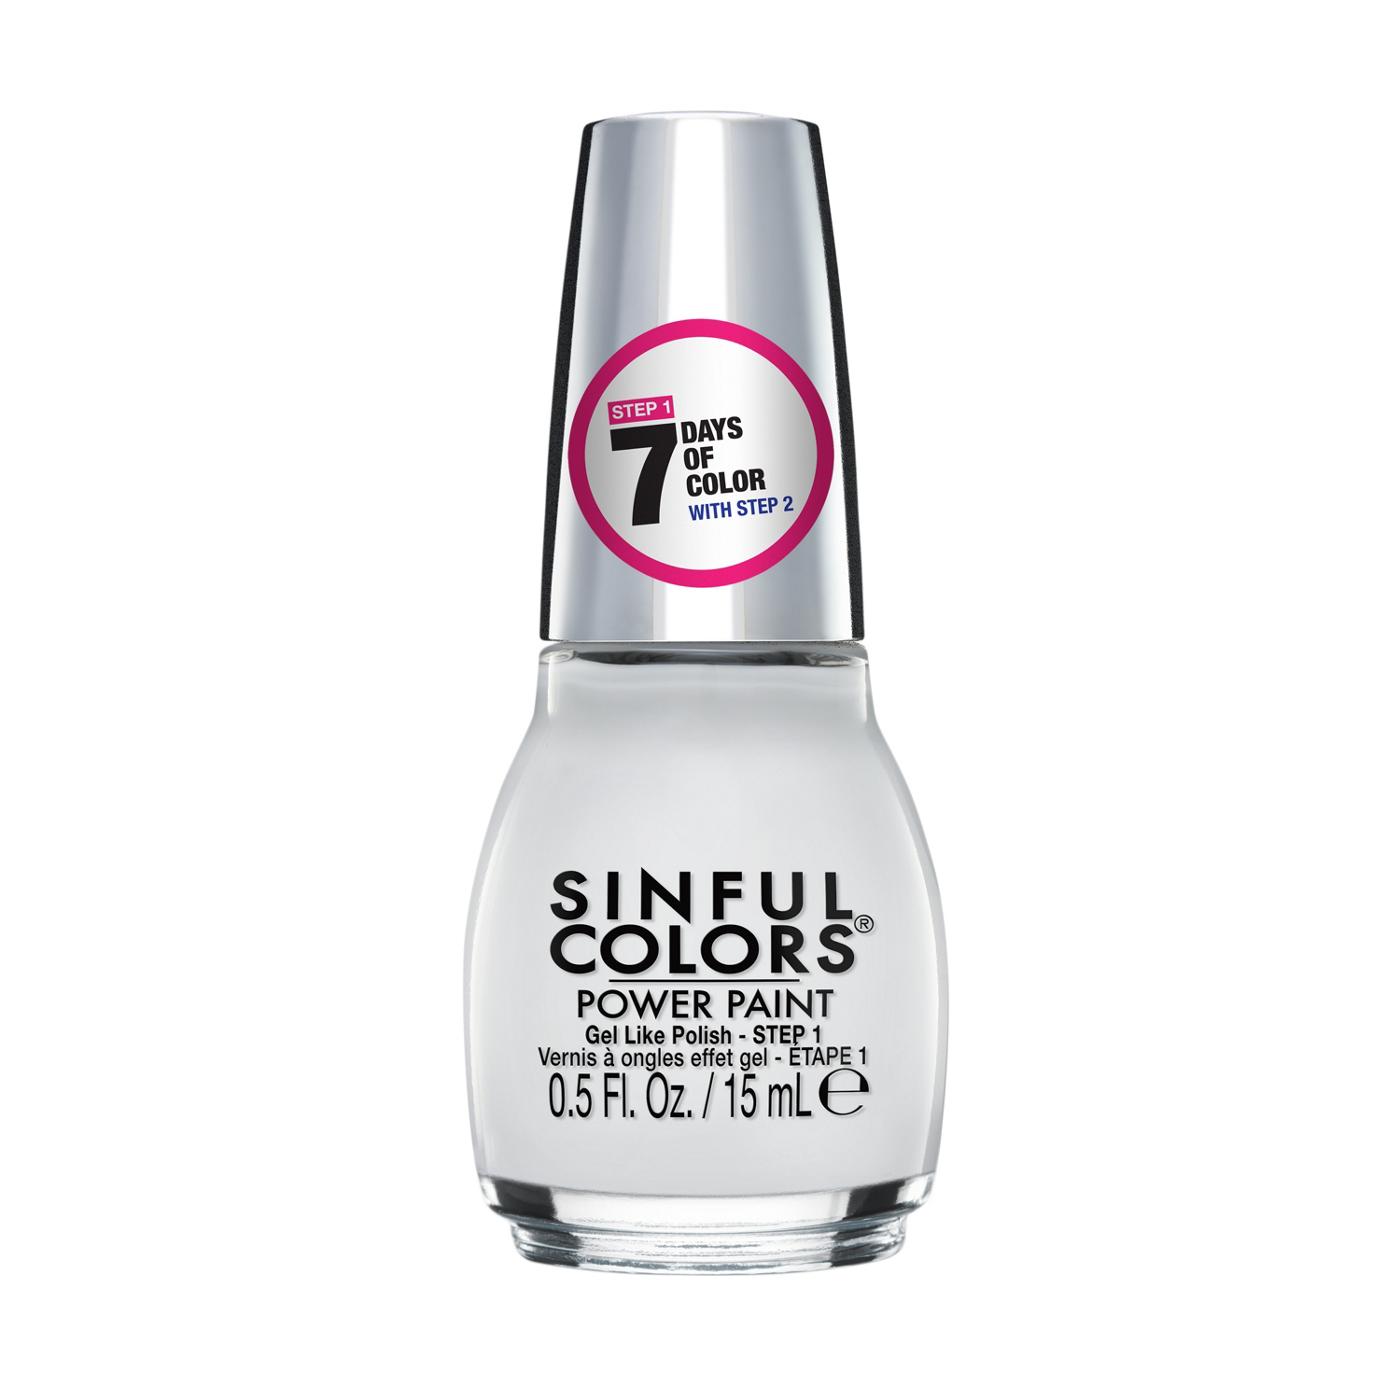 Sinful Colors Power Paint Nail Polish - Ain't Having it; image 1 of 6